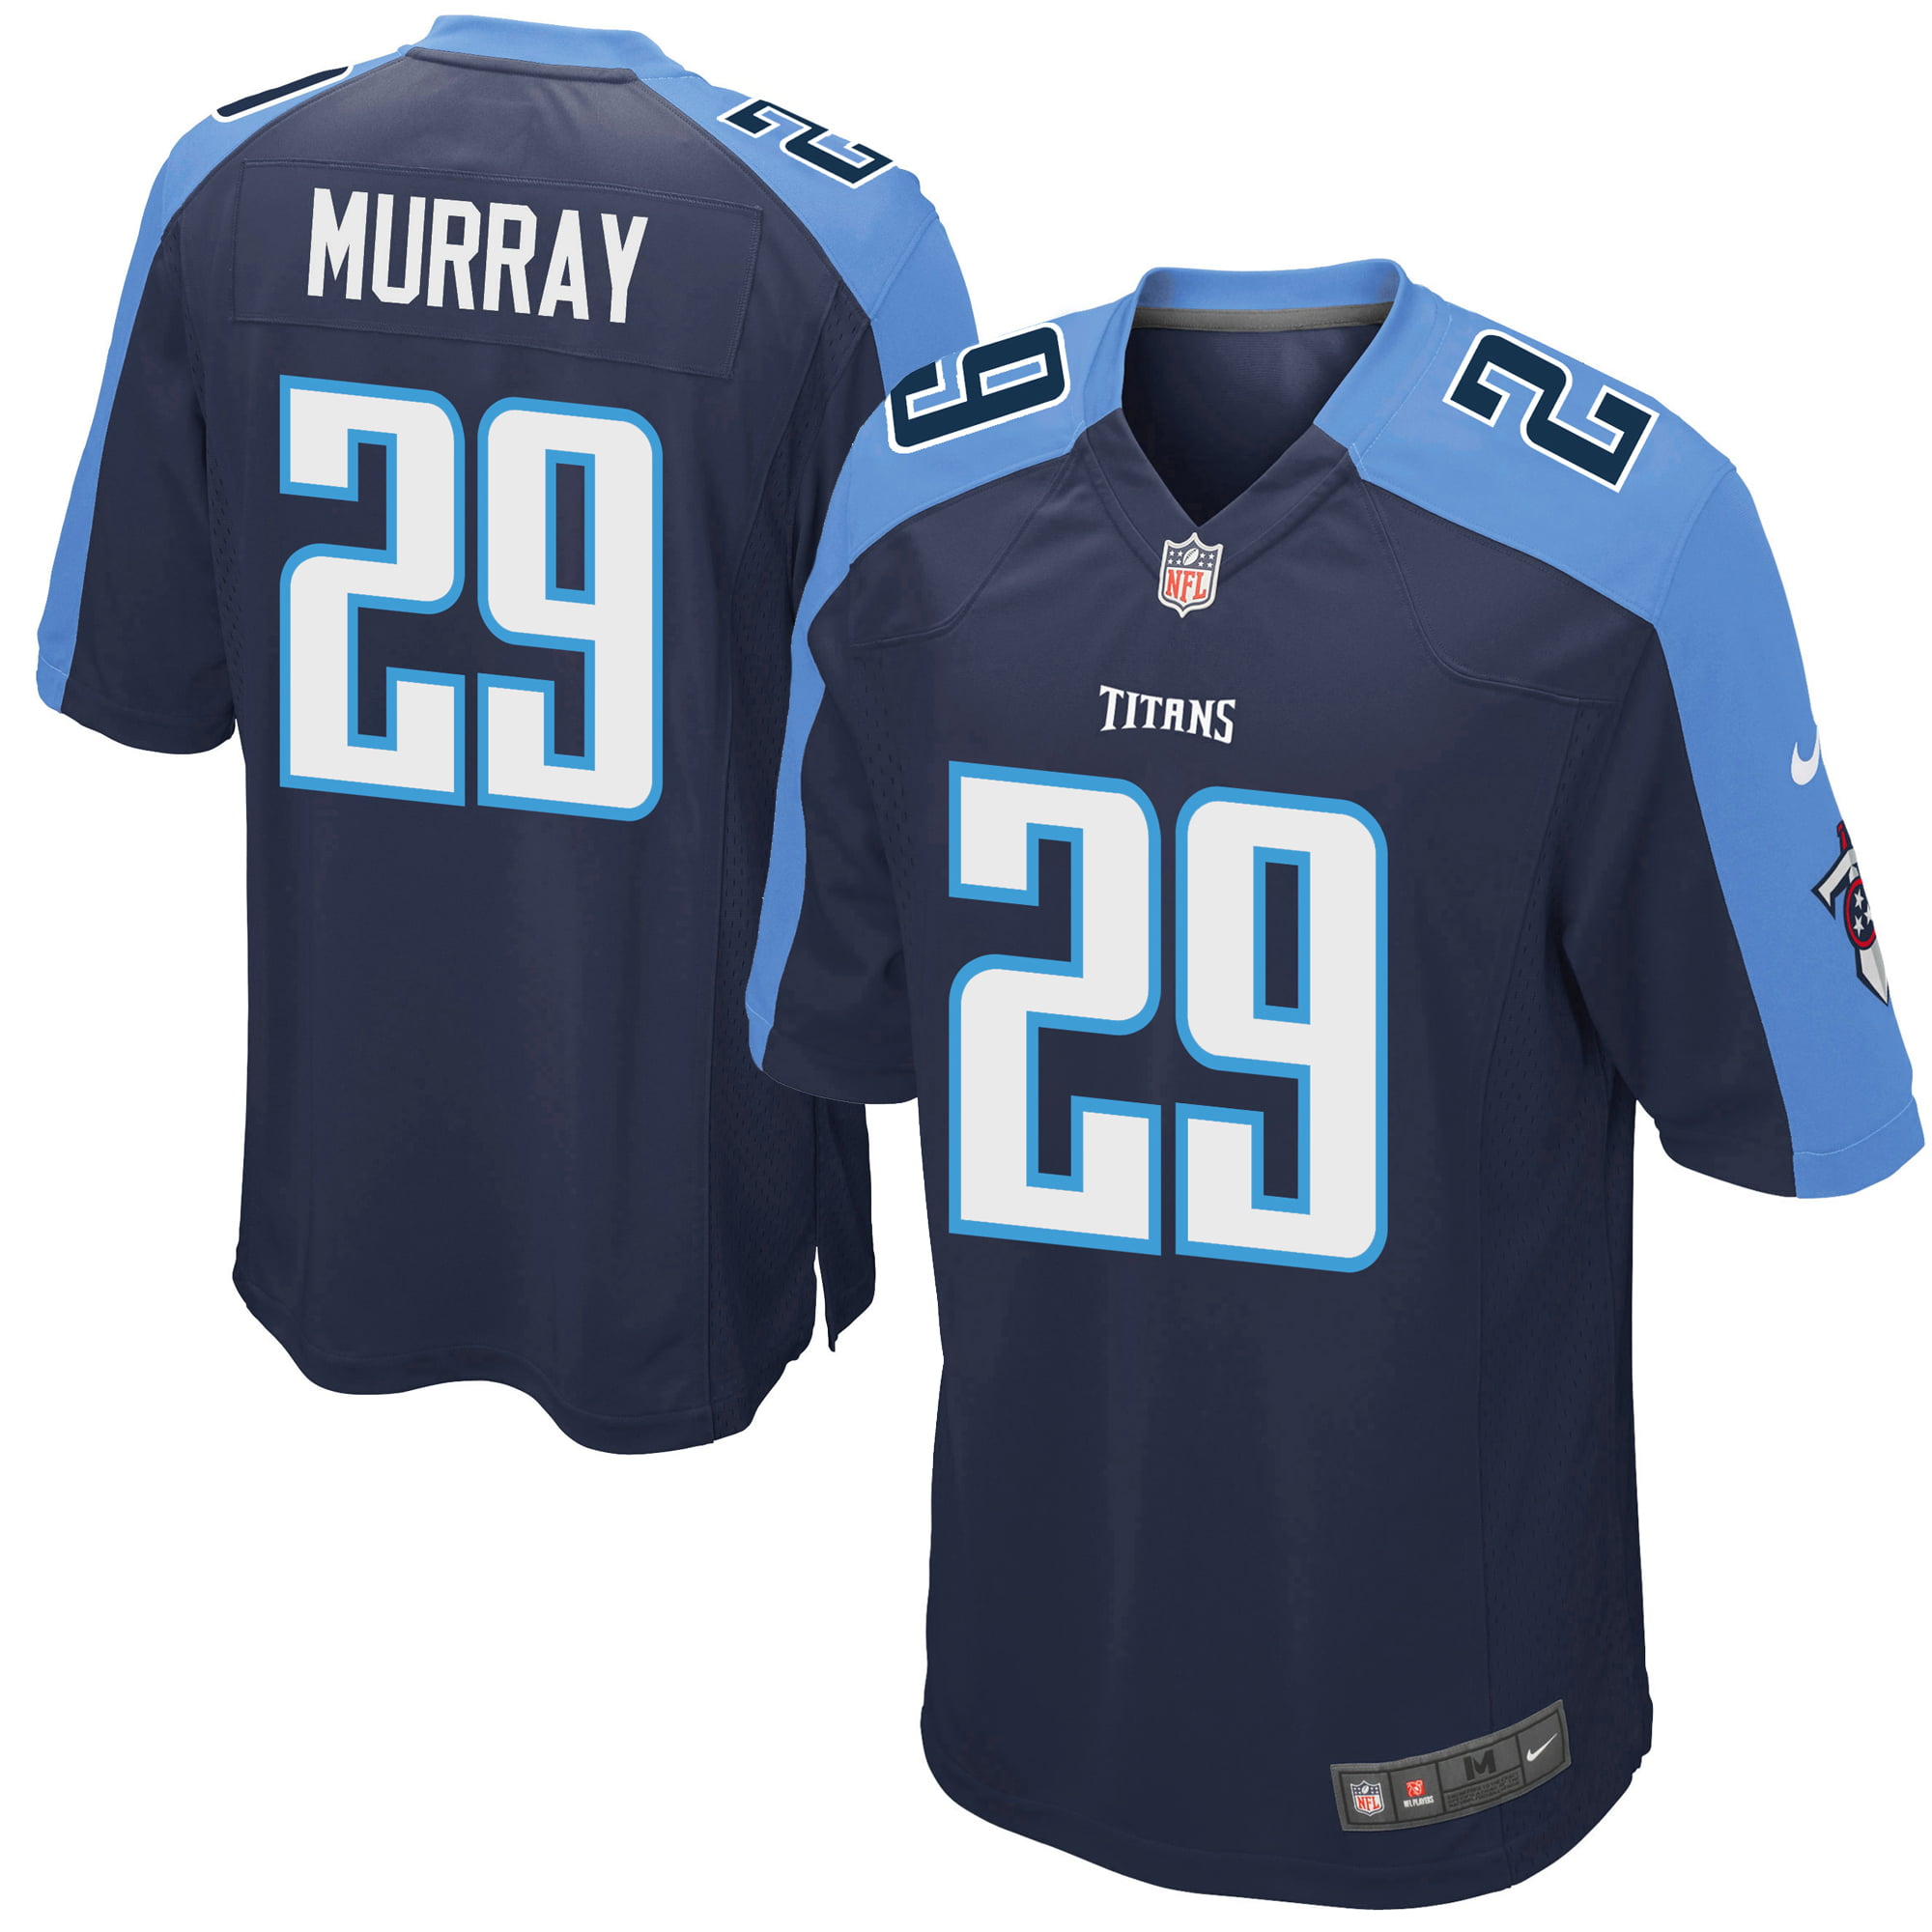 DeMarco Murray Tennessee Titans Nike Youth Game Jersey ...